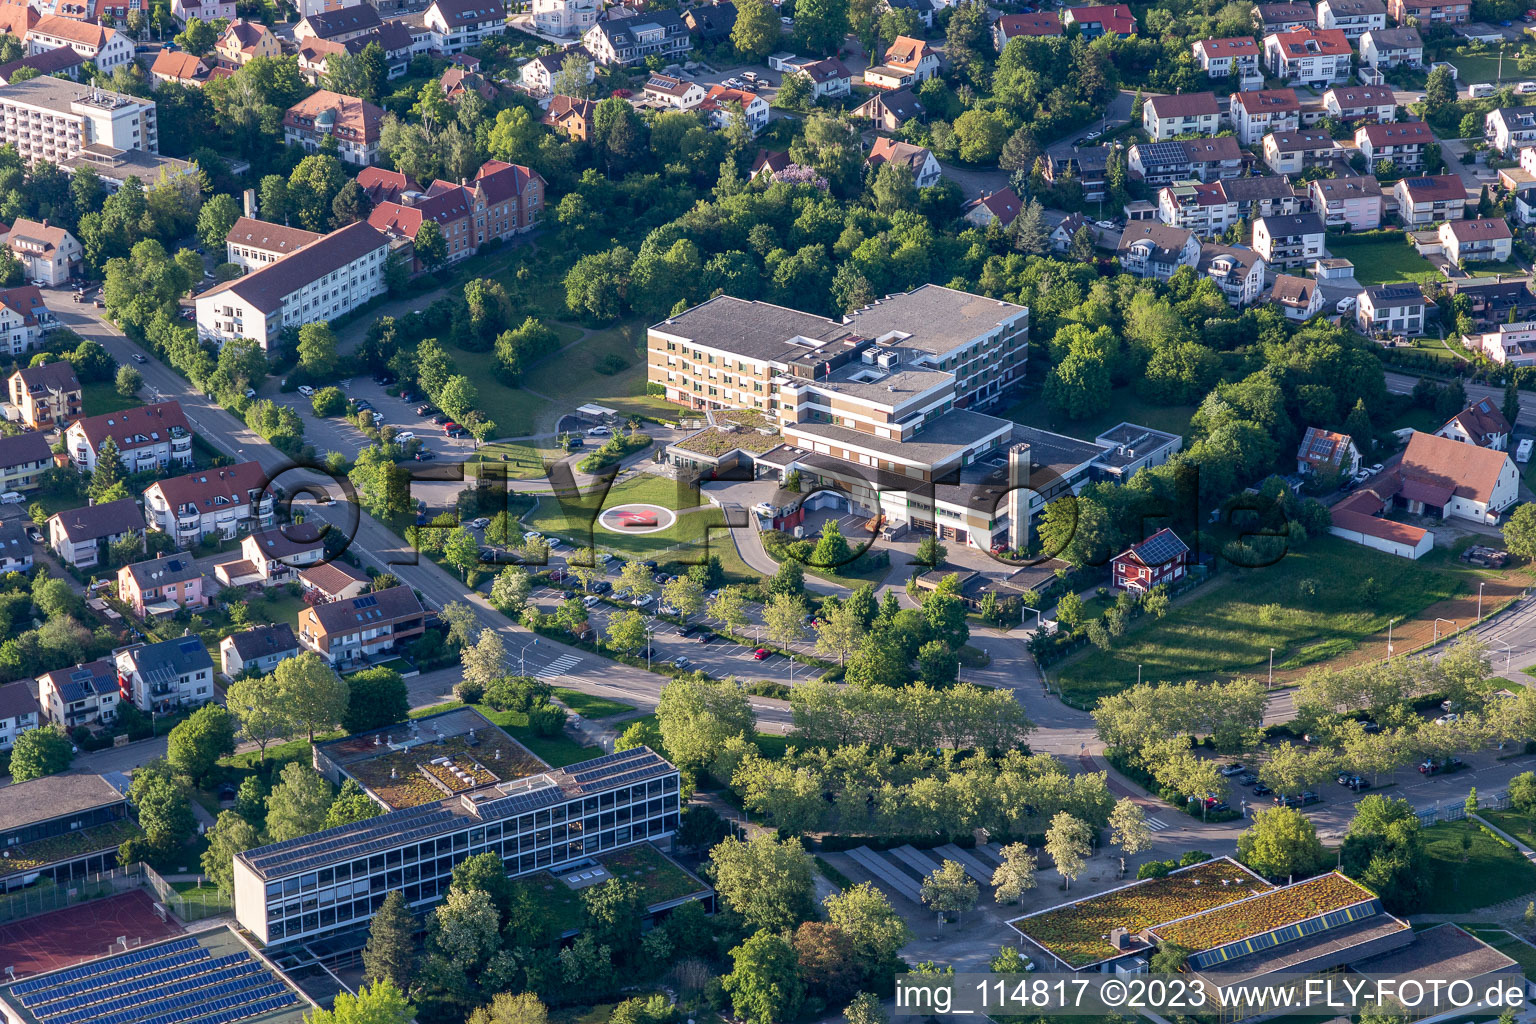 Hospital grounds of the Clinic in Herrenberg in the state Baden-Wurttemberg, Germany